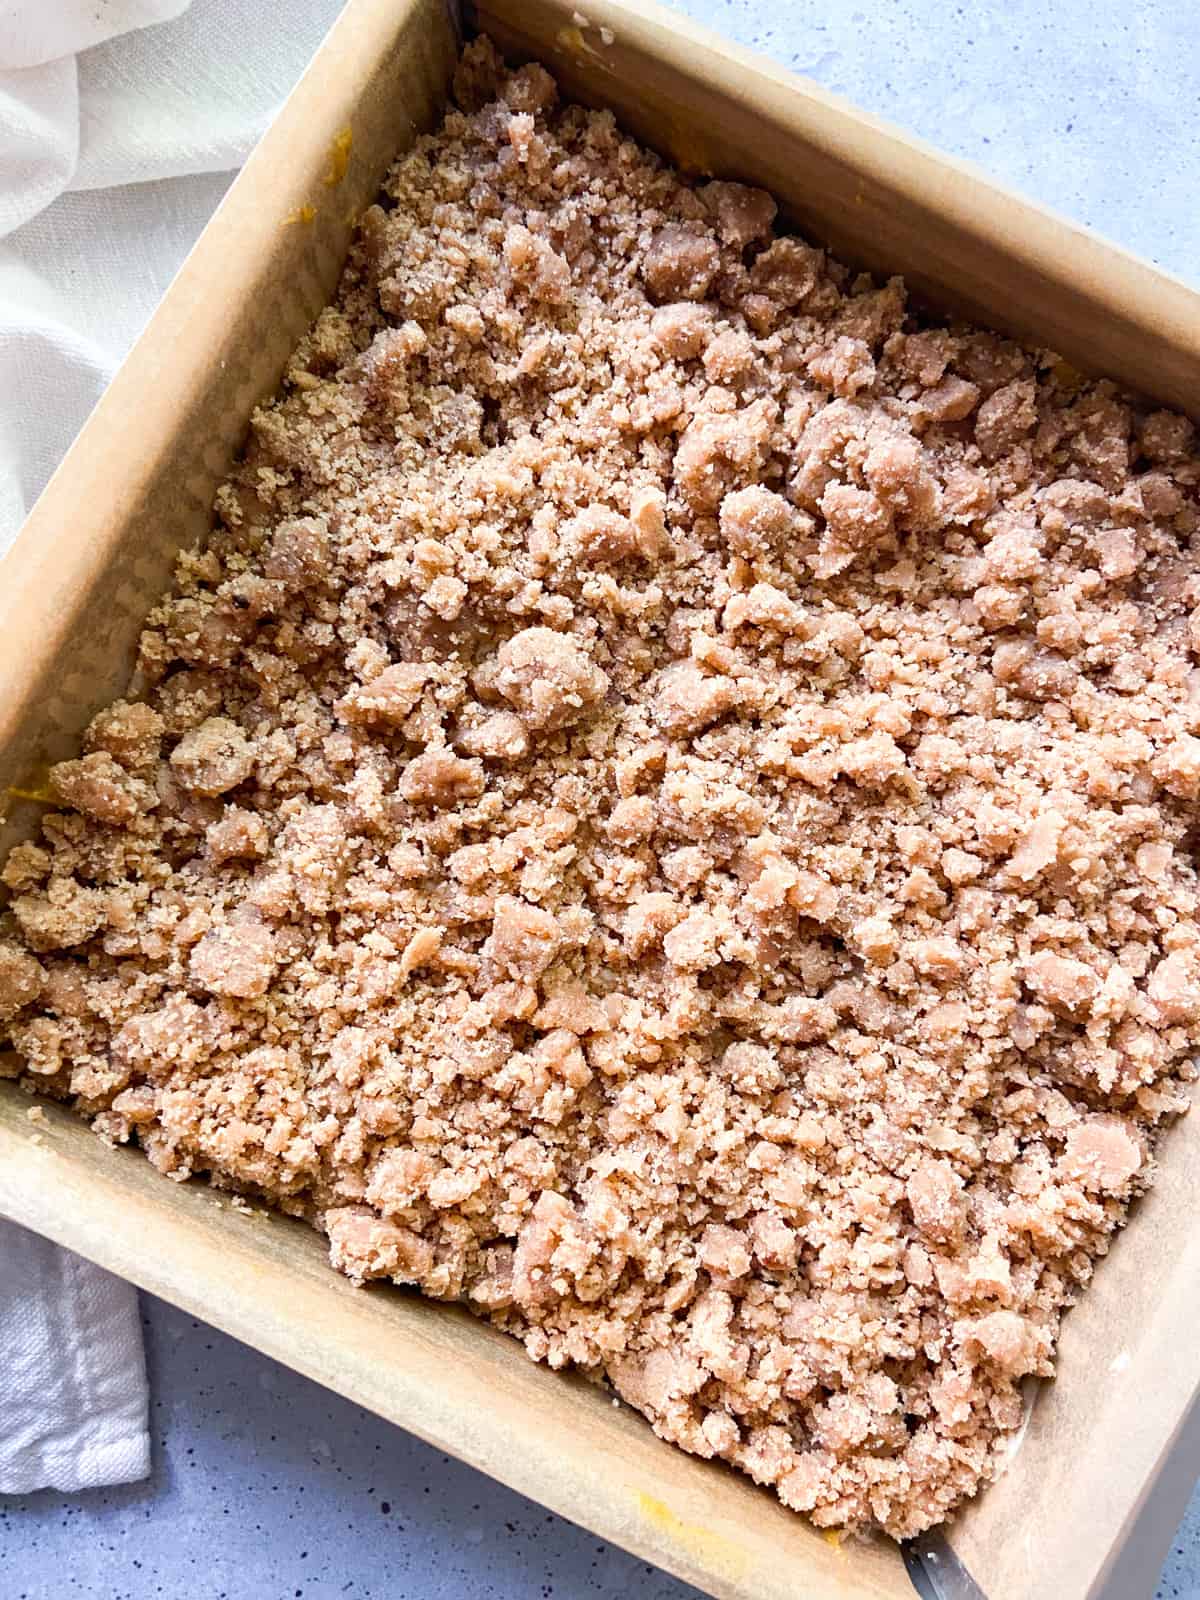 Unbaked crumb cake in a parchment-lined cake pan.